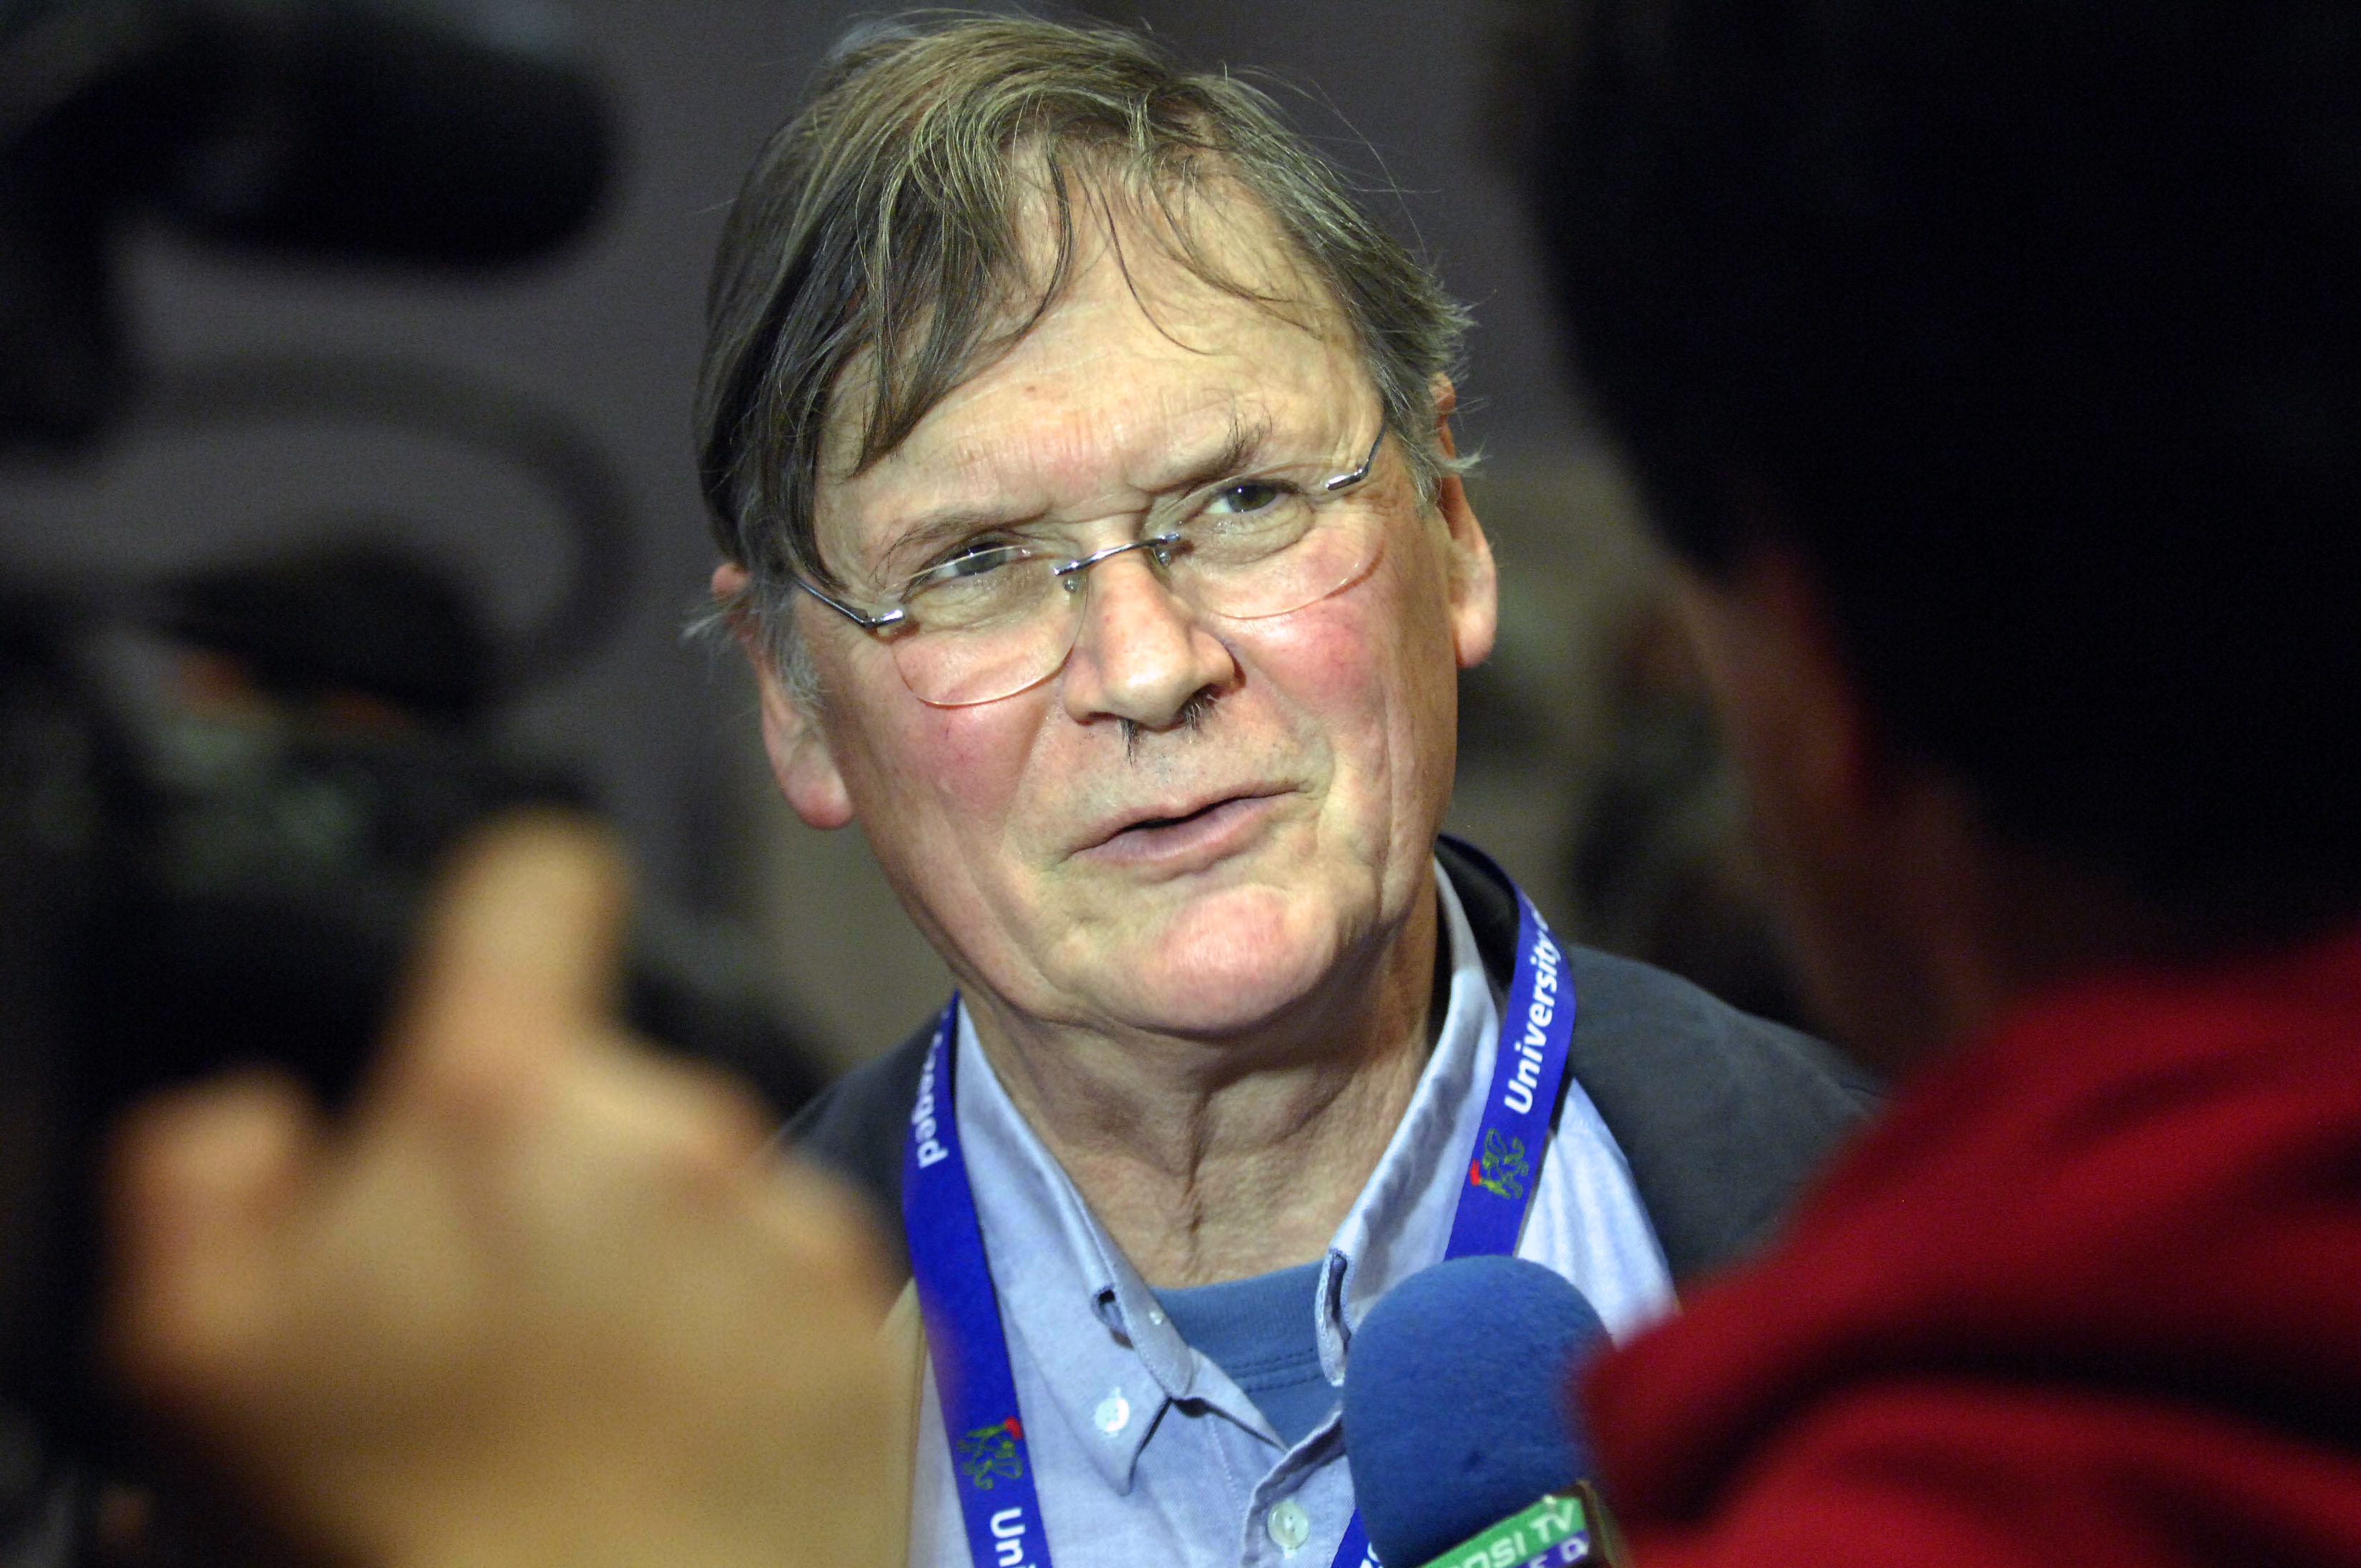 English biochemist, the Nobel-prize winner Sir Richard Timothy 'Tim' Hunt meets with the press at the Jozsef Attila Study and Information Centre of Szeged Sciences University in Szegede on March 22, 2012 (AFP/Getty Images)